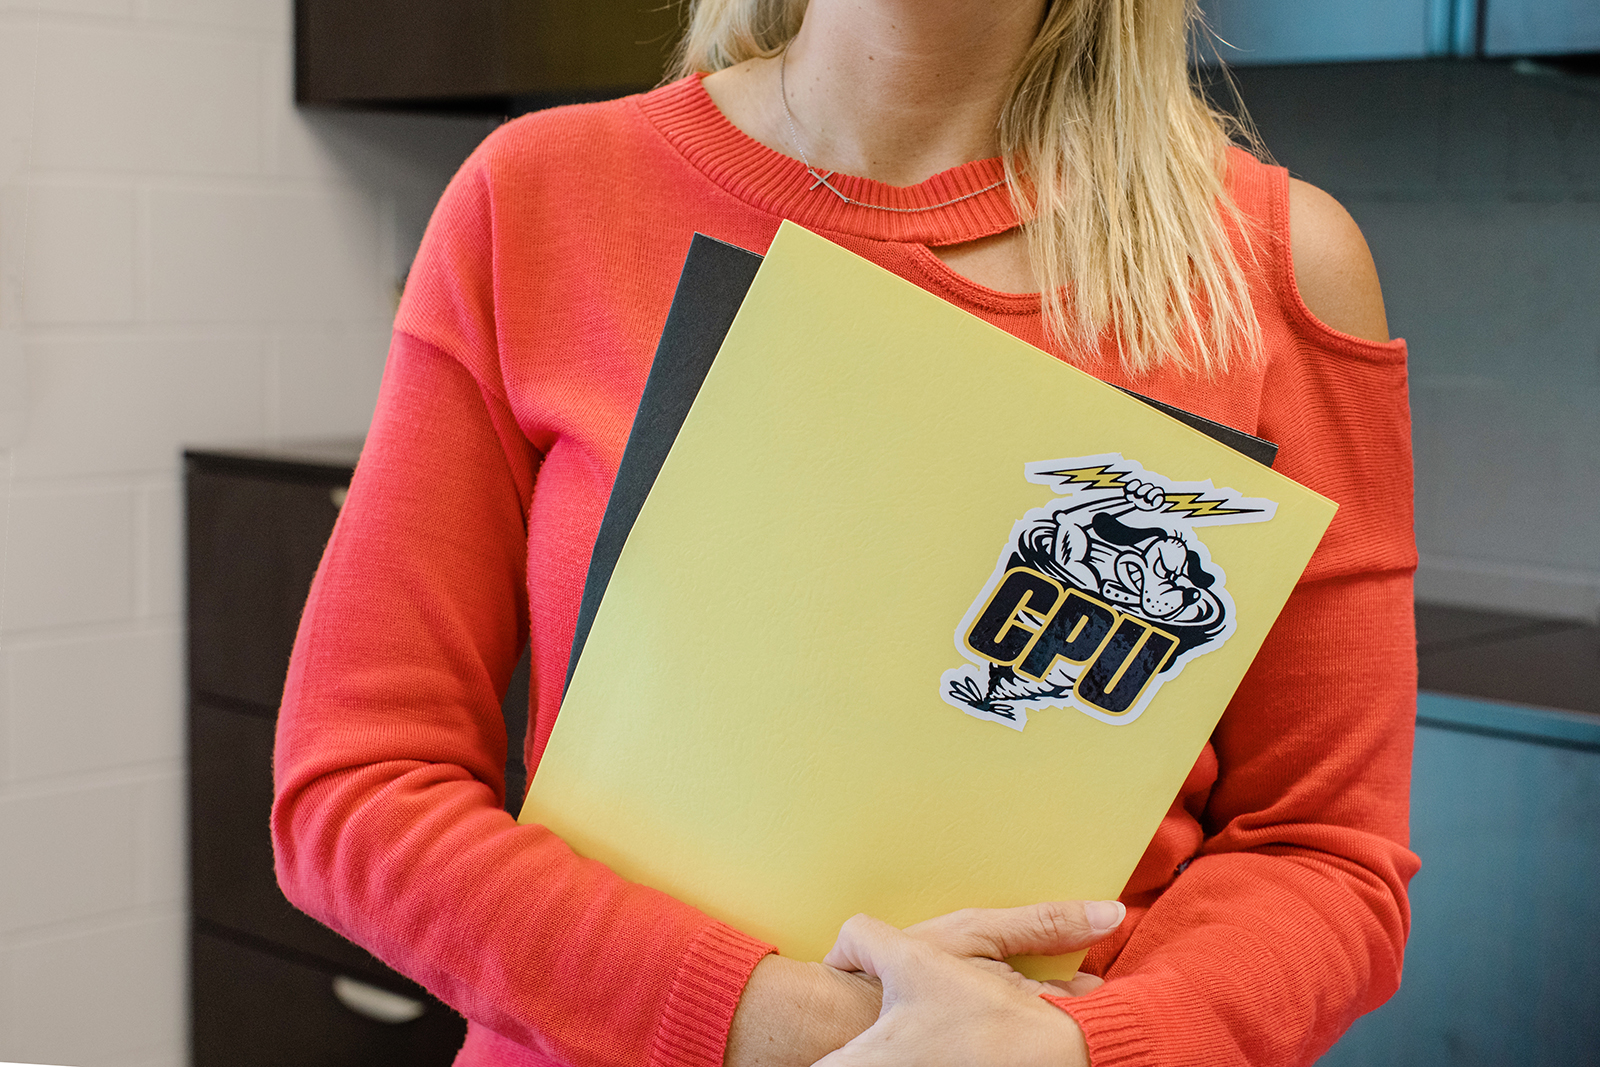 Teacher holding a yellow folder with the CPU logo on it